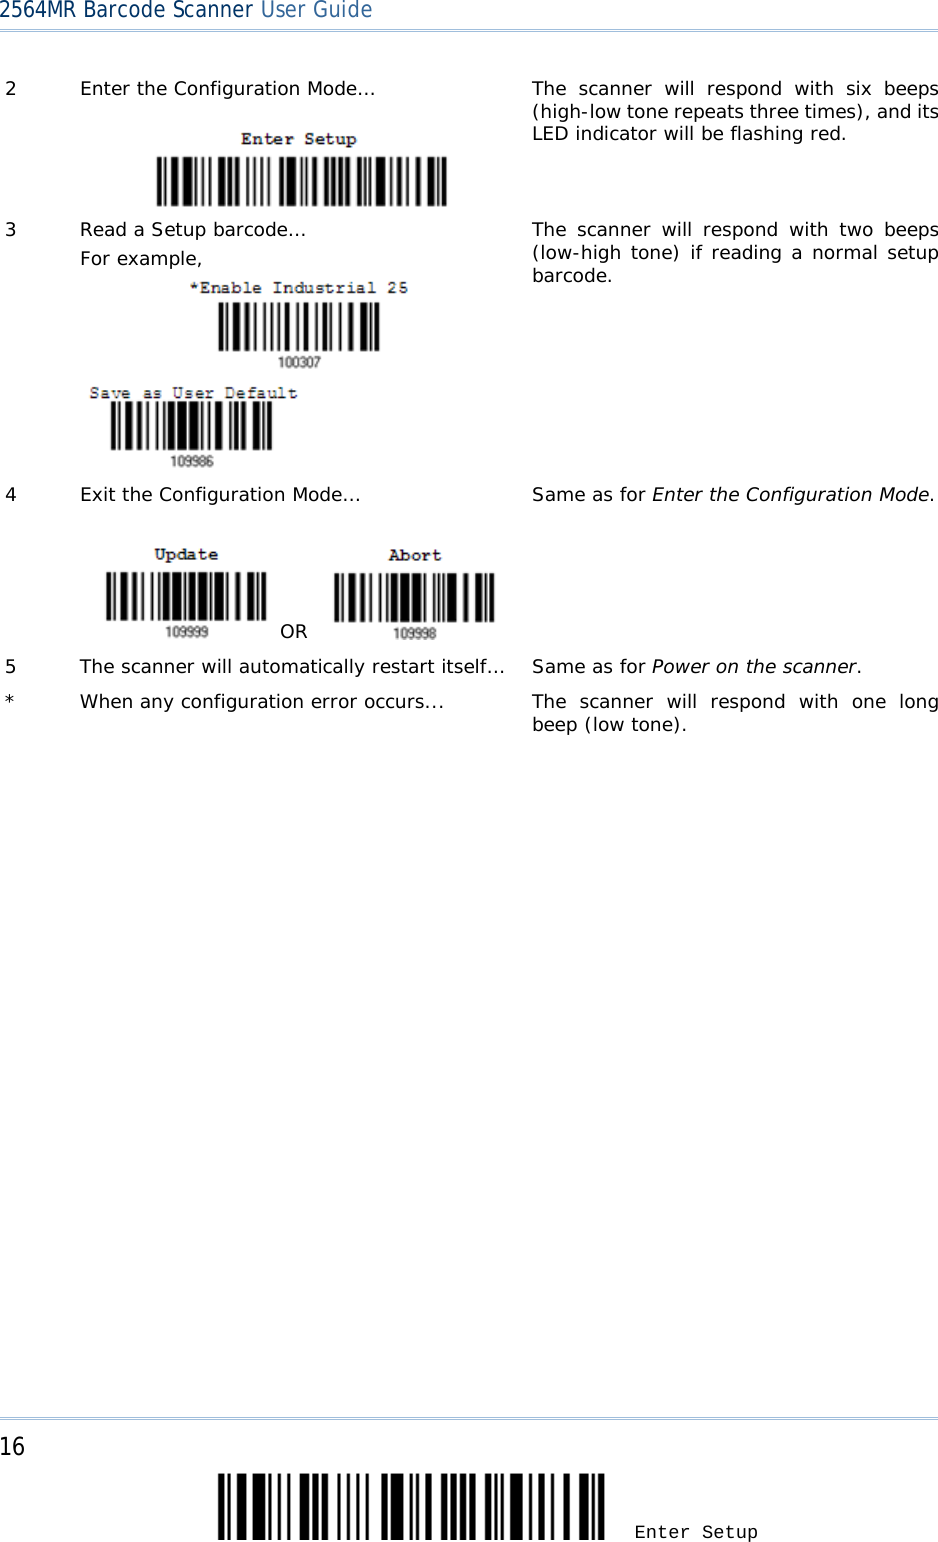 2564MR Barcode Scanner User Guide  2  Enter the Configuration Mode…   The scanner will respond with six beeps (high-low tone repeats three times), and its LED indicator will be flashing red.  3  Read a Setup barcode… For example,               The scanner will respond with two beeps (low-high tone) if reading a normal setup barcode. 4  Exit the Configuration Mode…      OR    Same as for Enter the Configuration Mode. 5  The scanner will automatically restart itself… Same as for Power on the scanner. *  When any configuration error occurs...  The scanner will respond with one long beep (low tone).   16 Enter Setup 